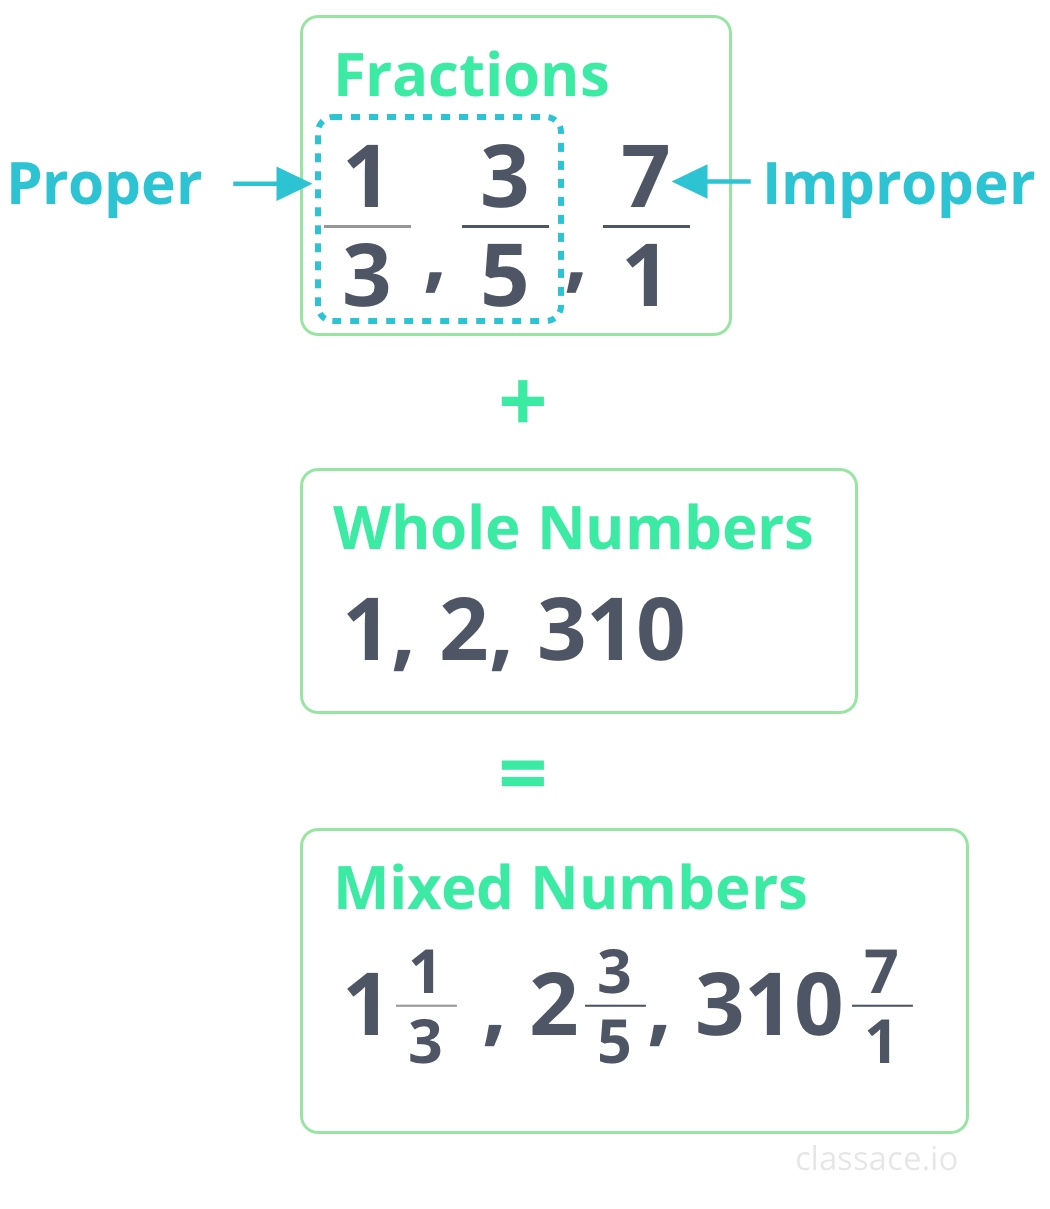 Fractions proper, improper, and mixed numbers